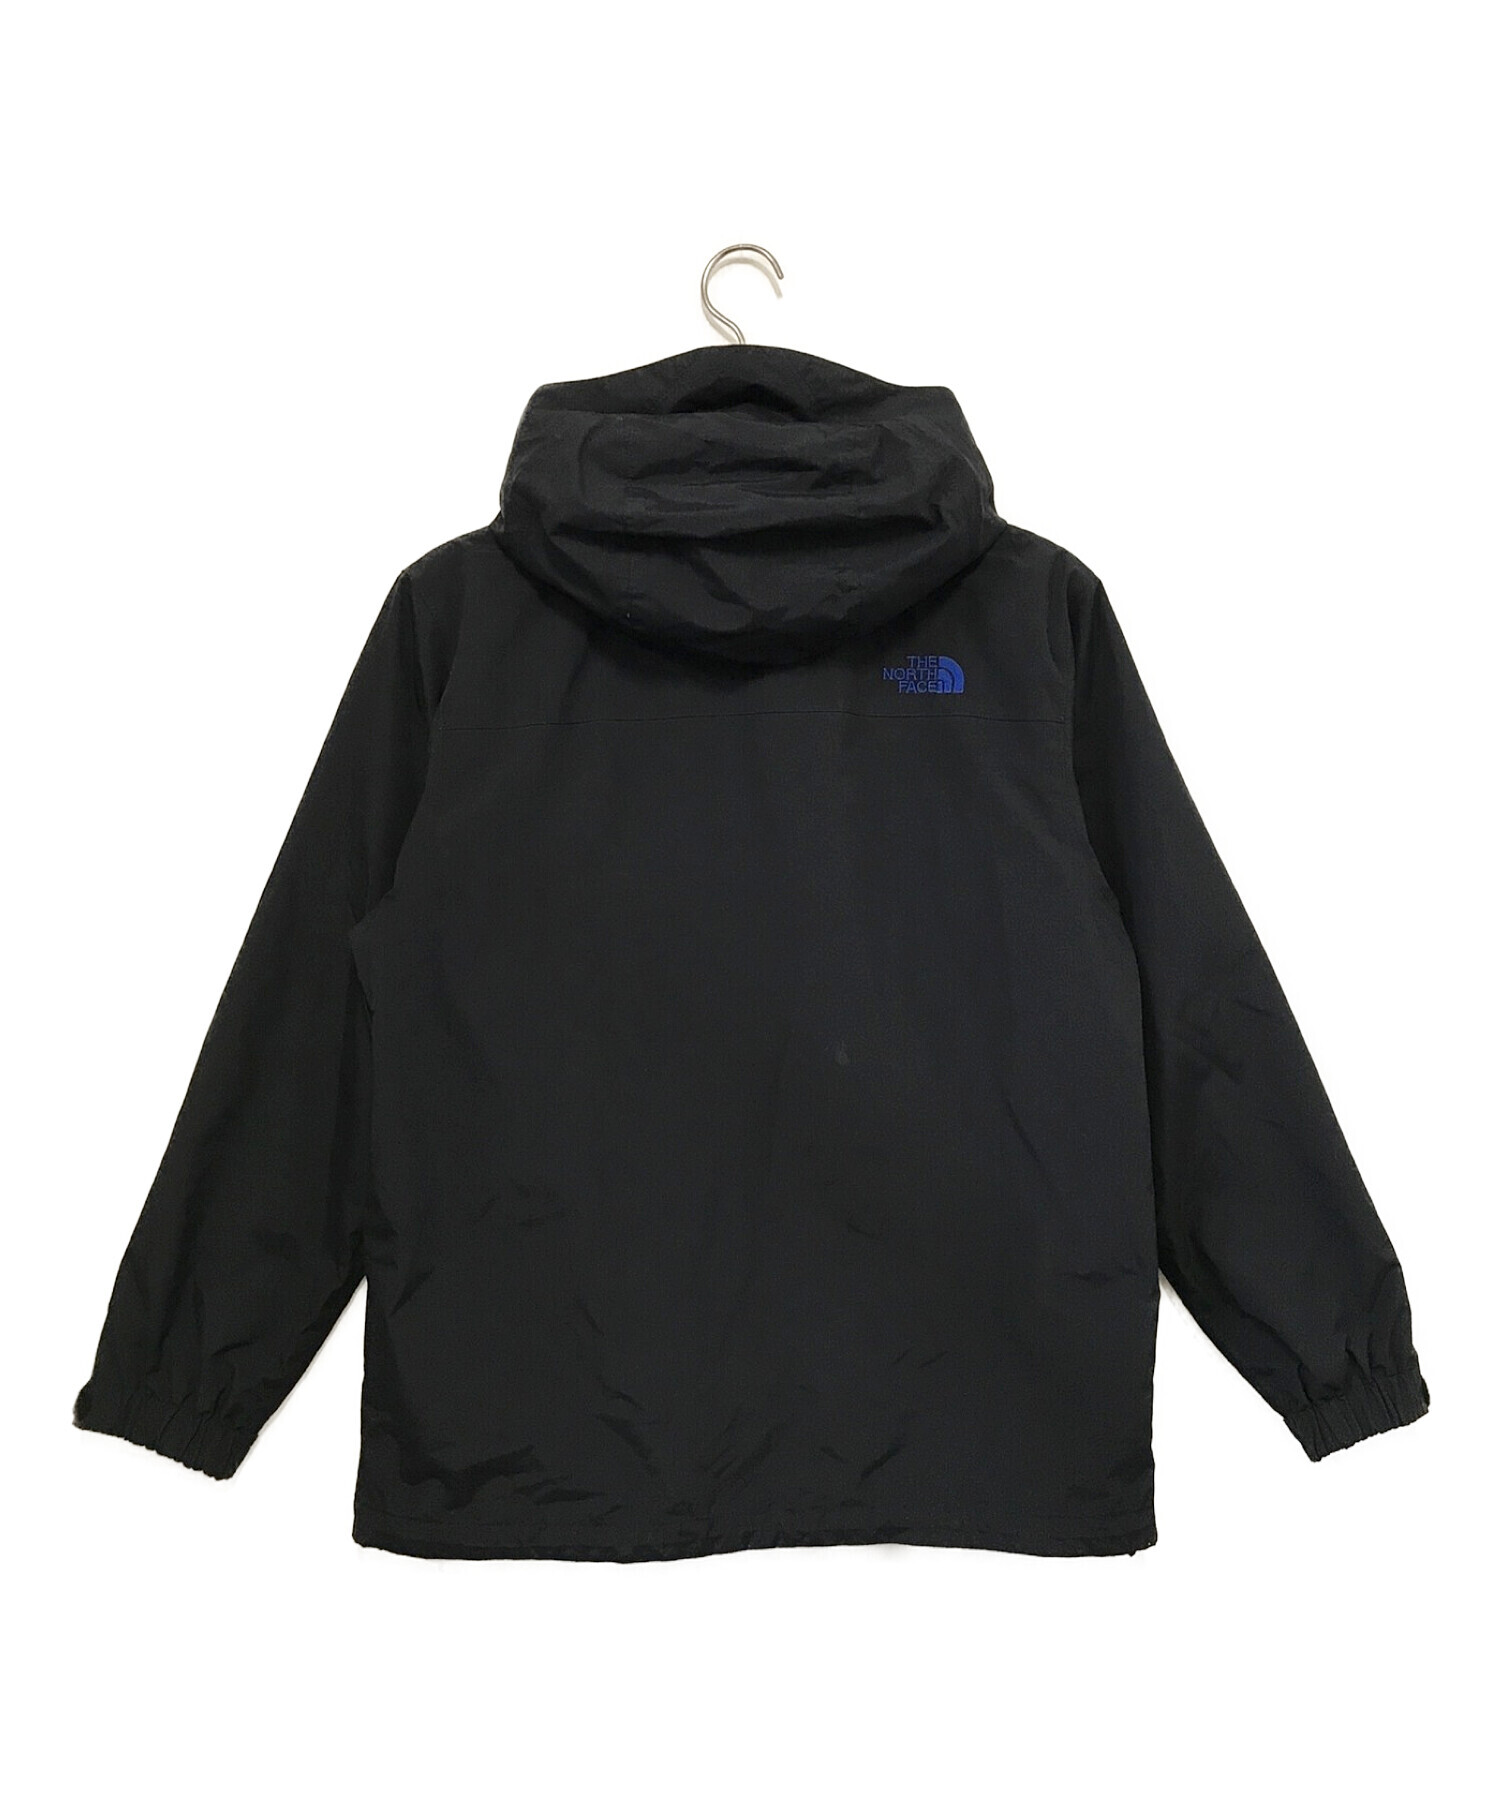 THE NORTH FACE SCOOP JACKET BLACK S